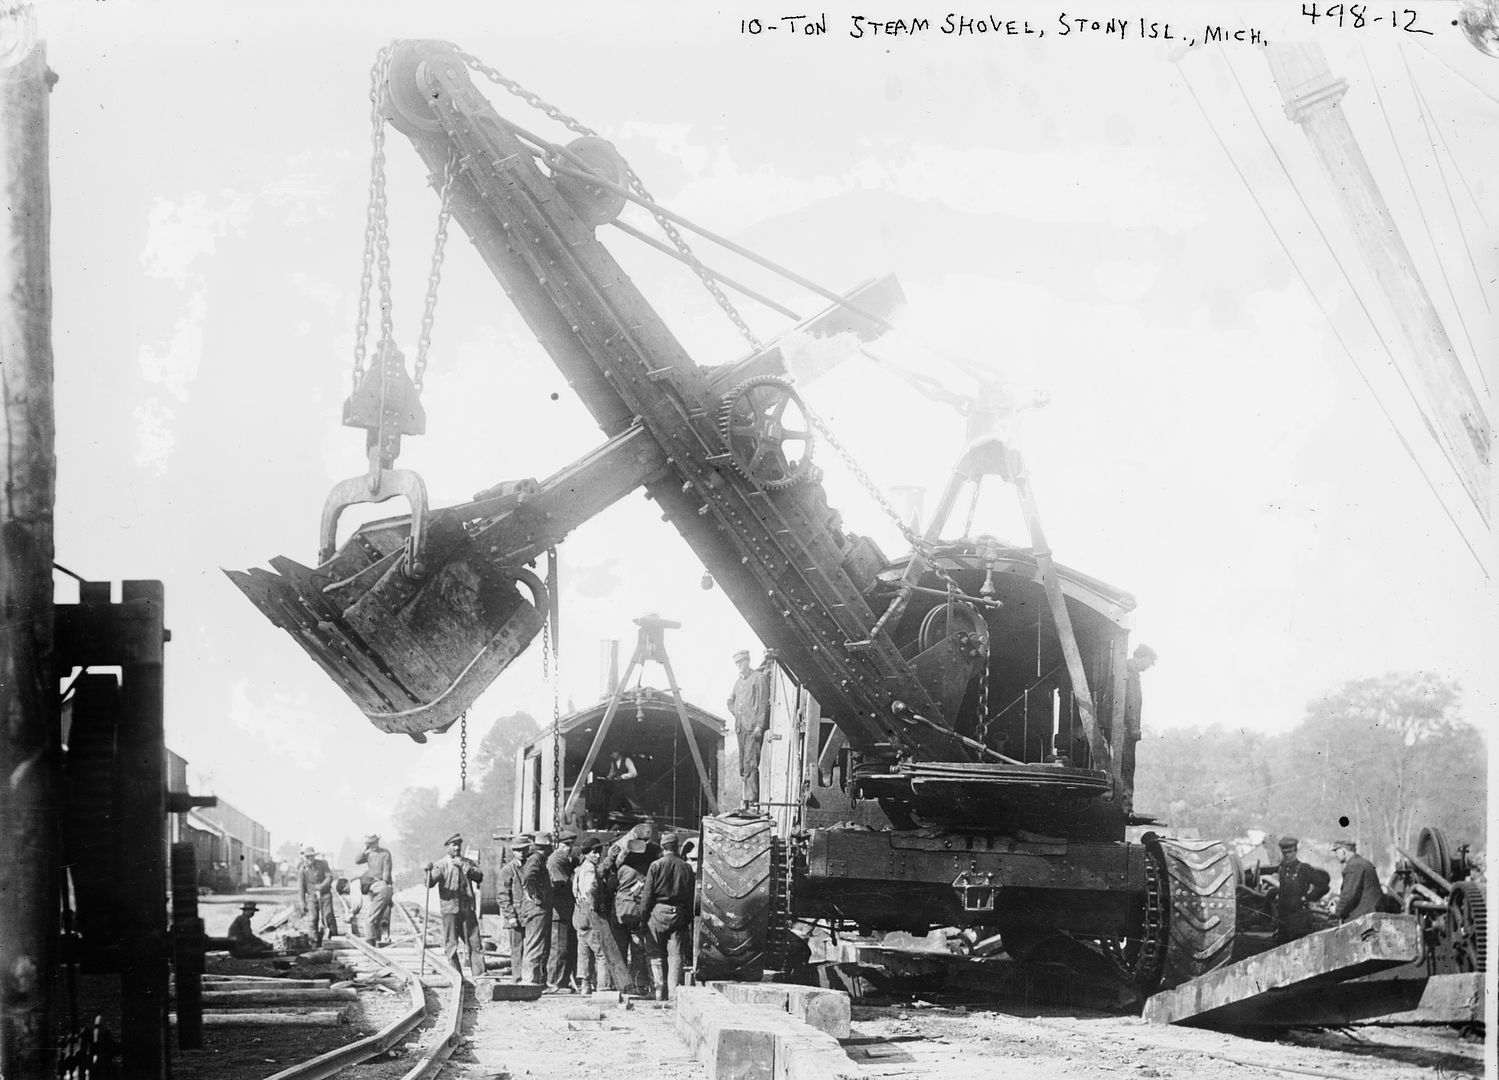 And the steam shovel фото 8